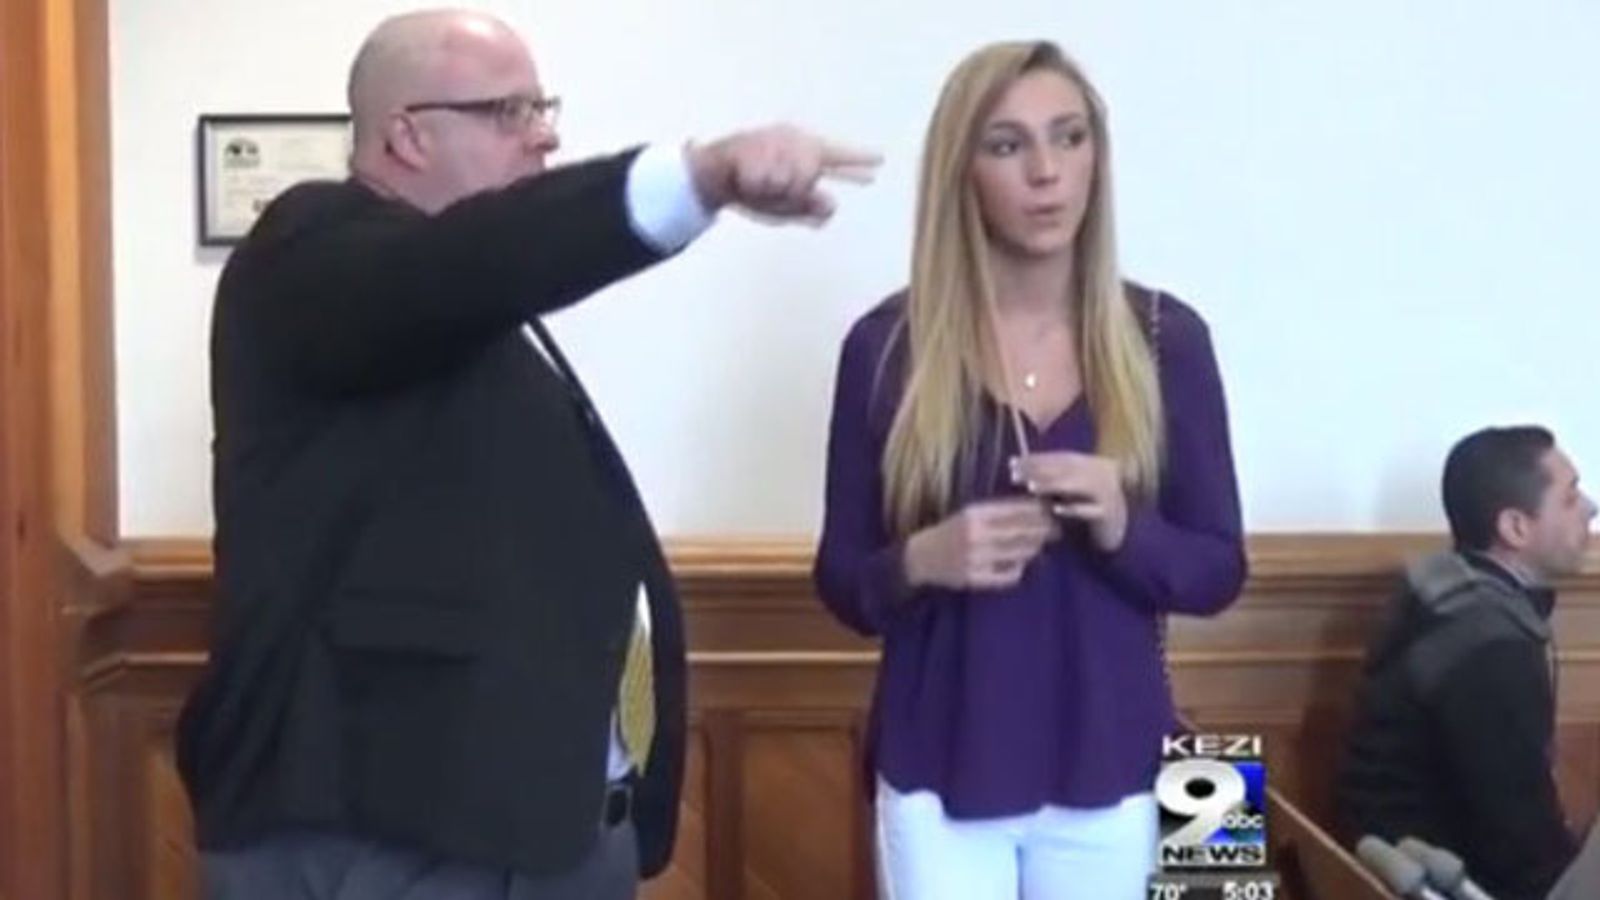 ‘Library Girl’ Kendra Sunderland Pleads Guilty to Public Indecency